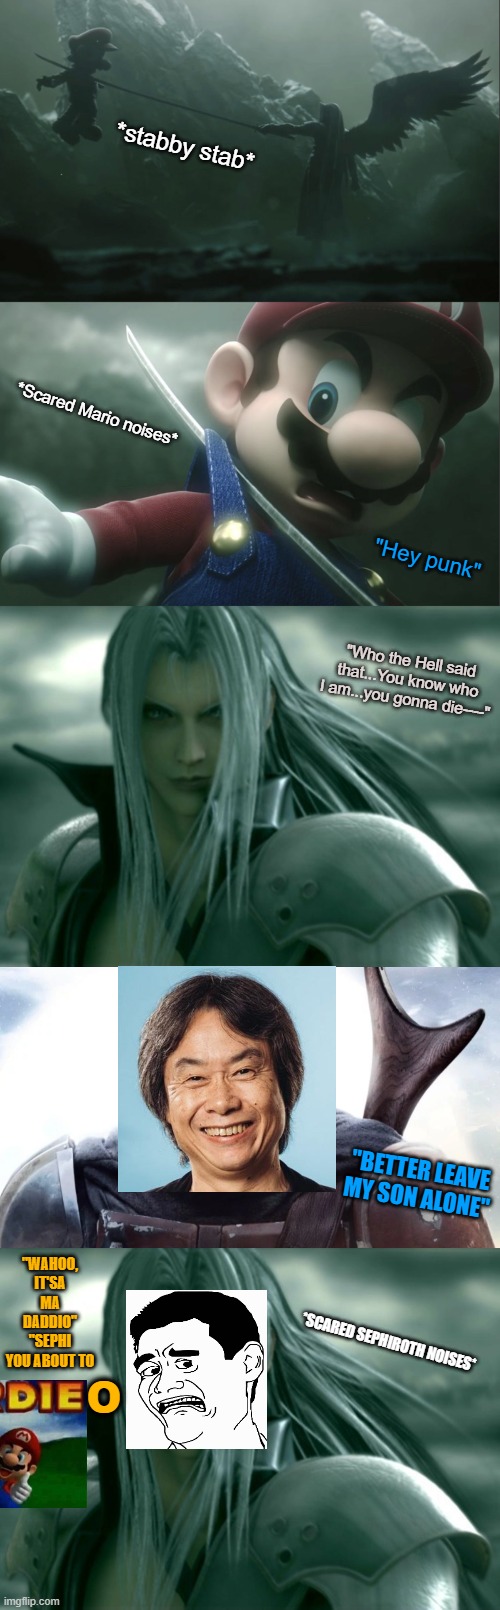 Mario's Dad is gonna kick some @$$ | *stabby stab*; *Scared Mario noises*; "Hey punk"; "Who the Hell said that...You know who I am...you gonna die----"; "BETTER LEAVE MY SON ALONE"; "WAHOO, IT'SA MA DADDIO"
"SEPHI YOU ABOUT TO; *SCARED SEPHIROTH NOISES*; O | image tagged in sephiroth impaling mario in smash,mando,mario,nintendo,sephiroth,super smash bros | made w/ Imgflip meme maker